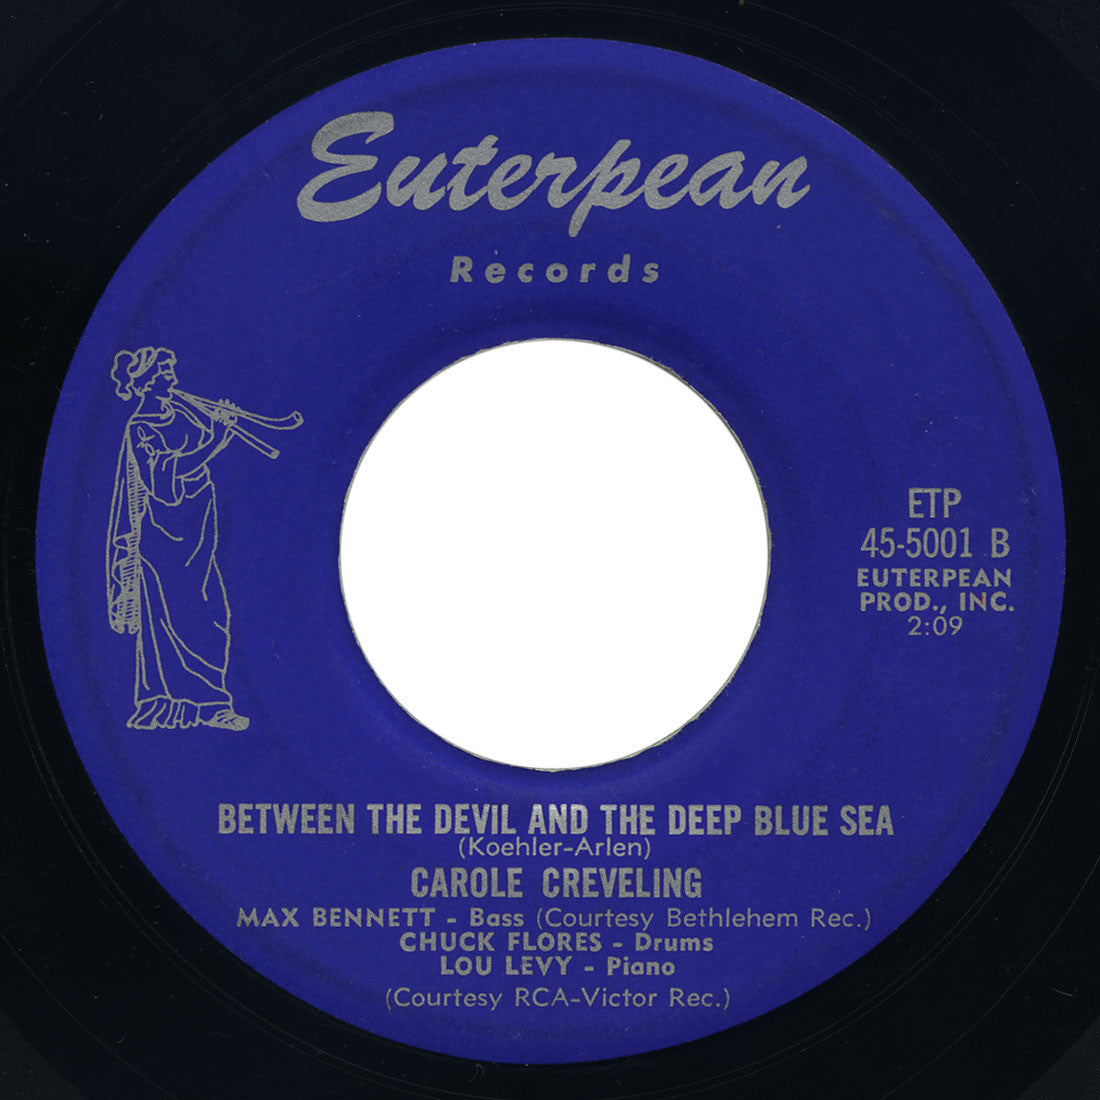 Carole Creveling – Between The Devil And The Deep Blues Sea